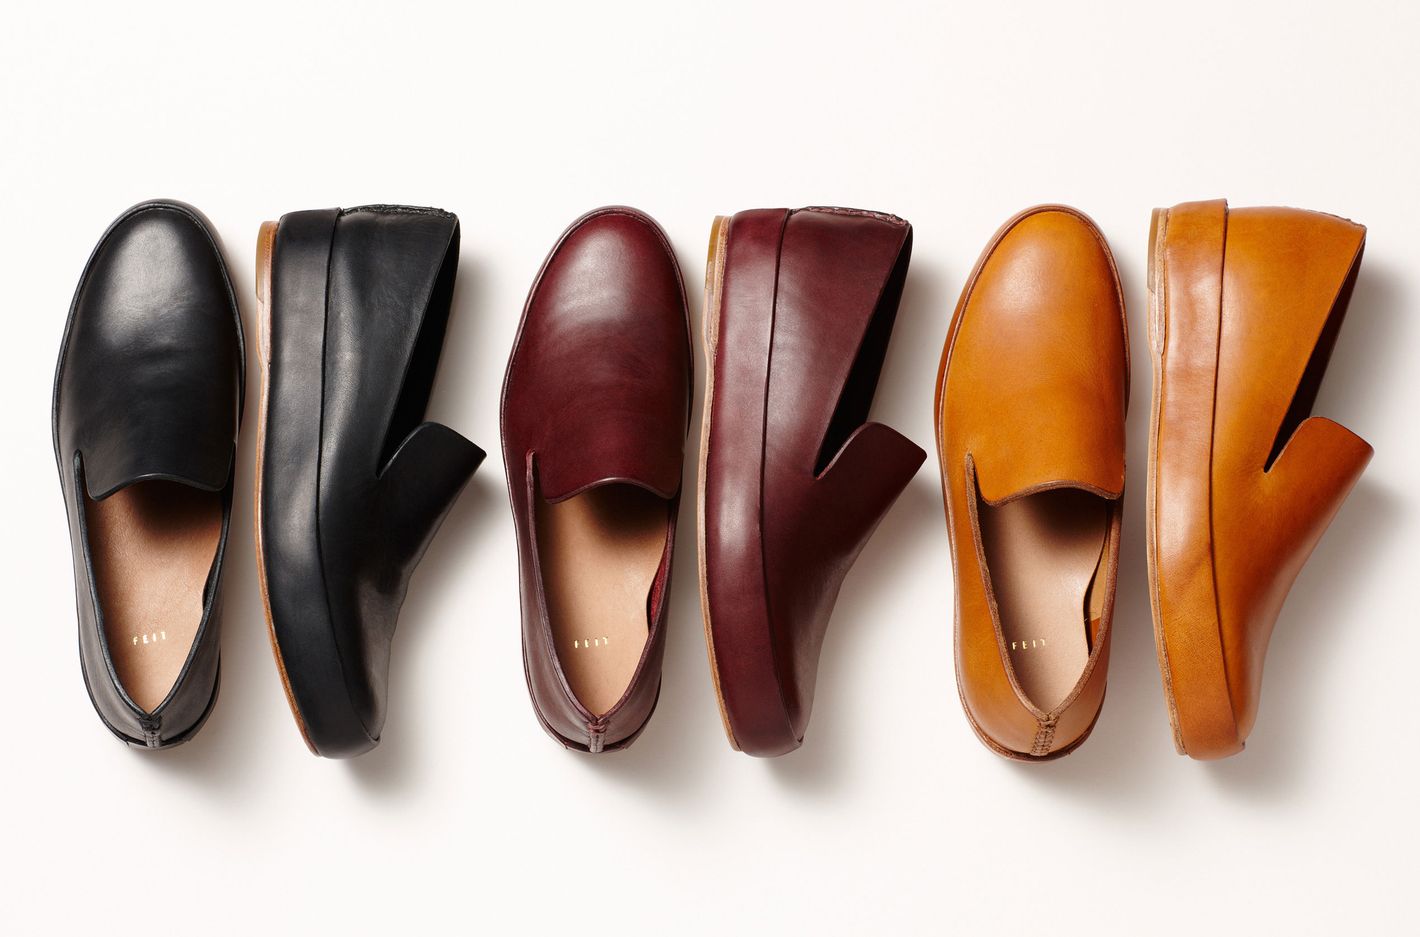 Meet FEIT, a Shoe Brand That Believes in Quality Over Quantity